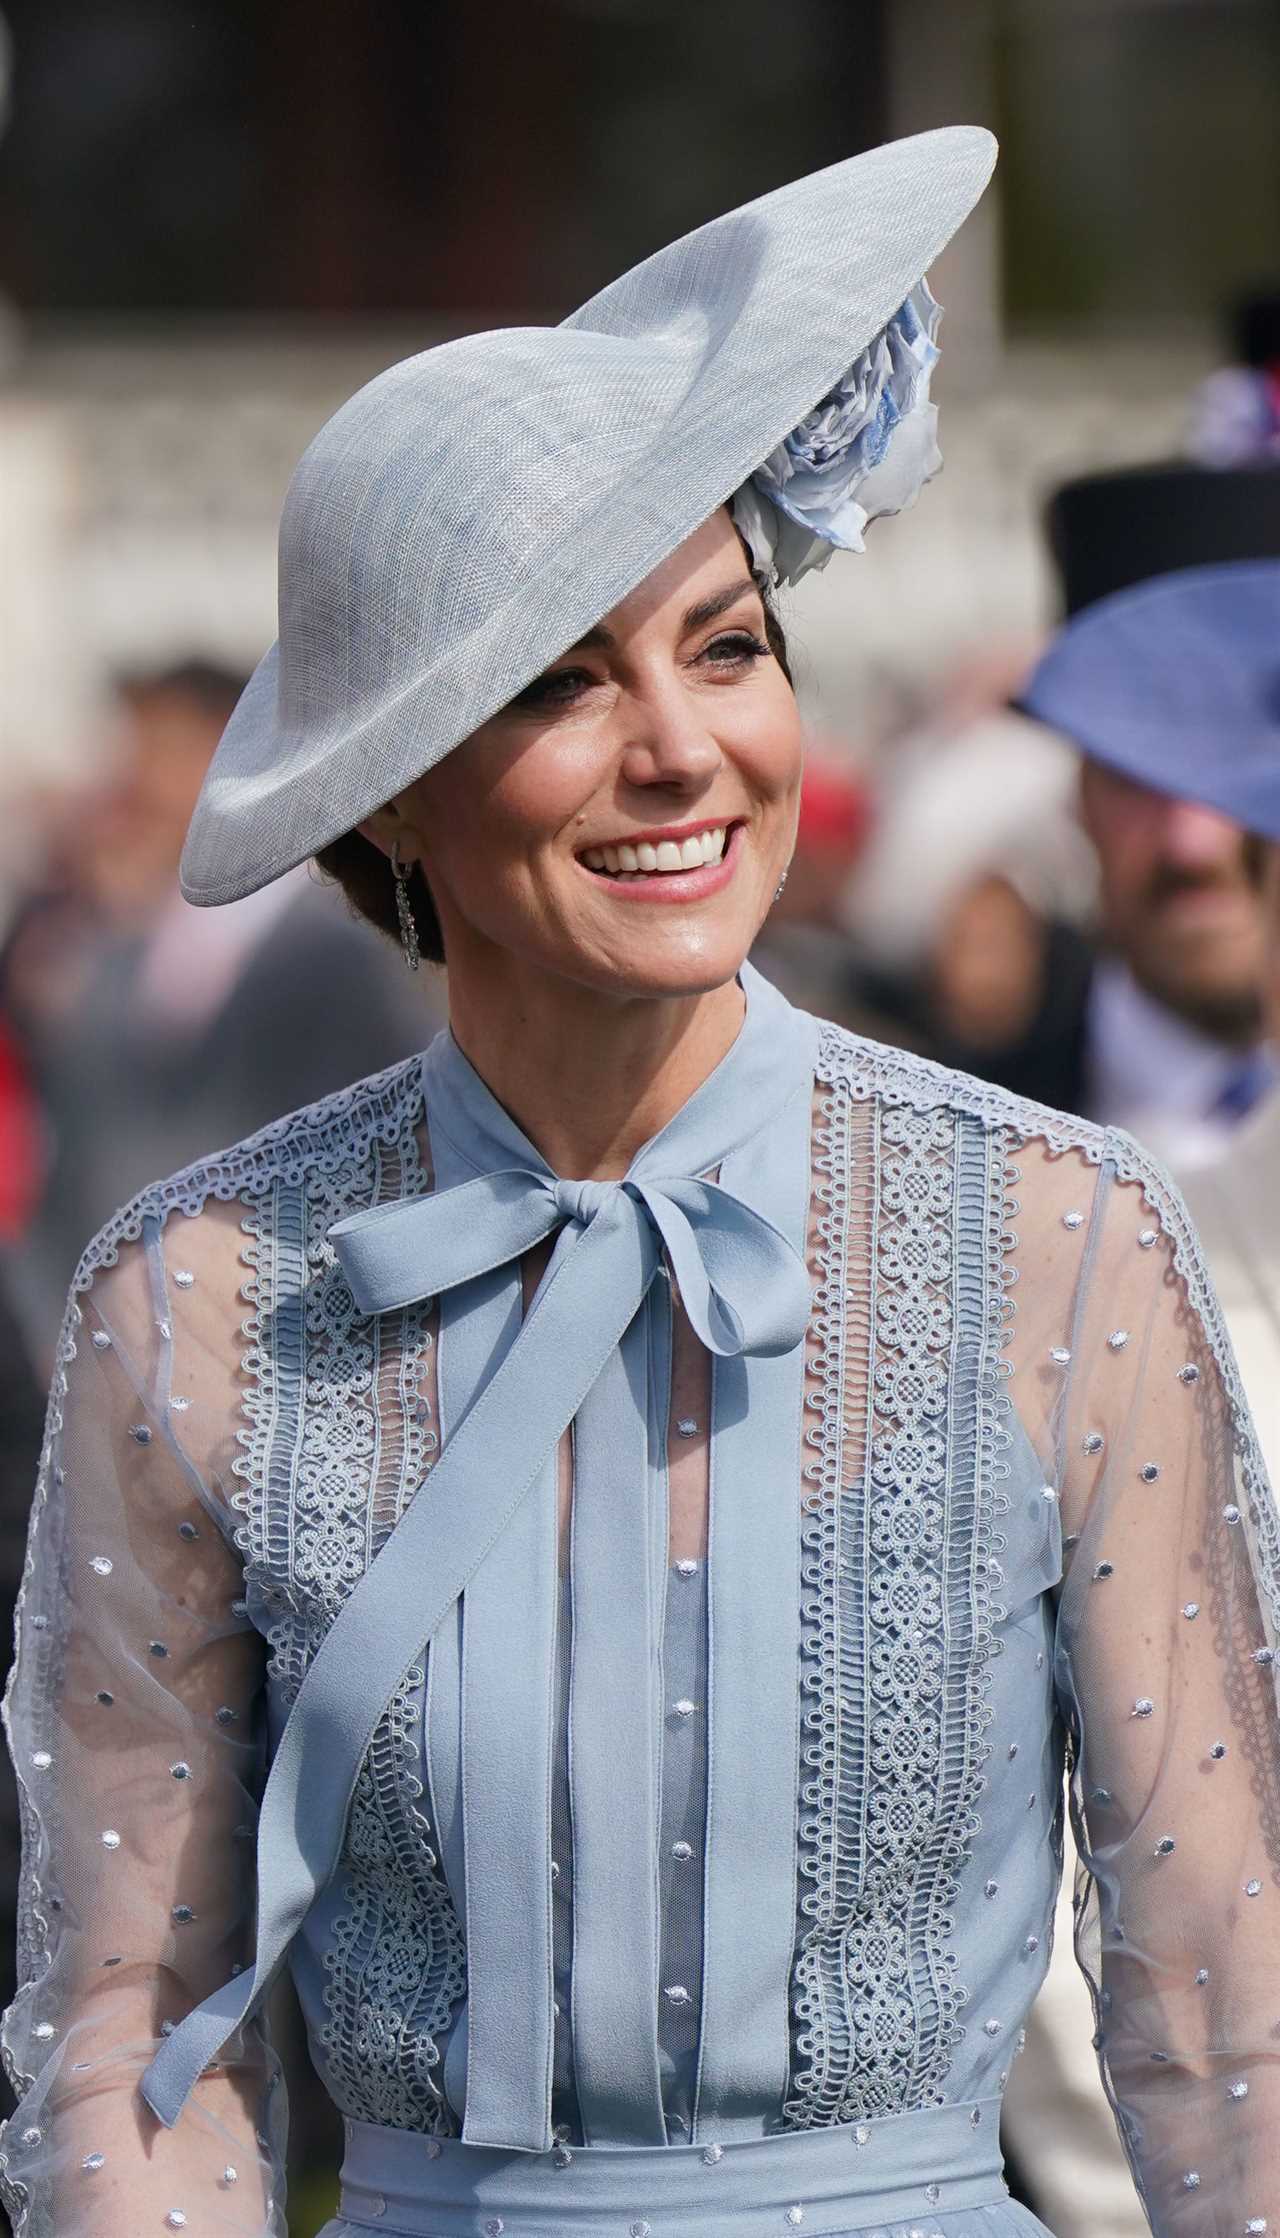 Kate Middleton all smiles as she arrives at garden party with Prince William at Buckingham Palace